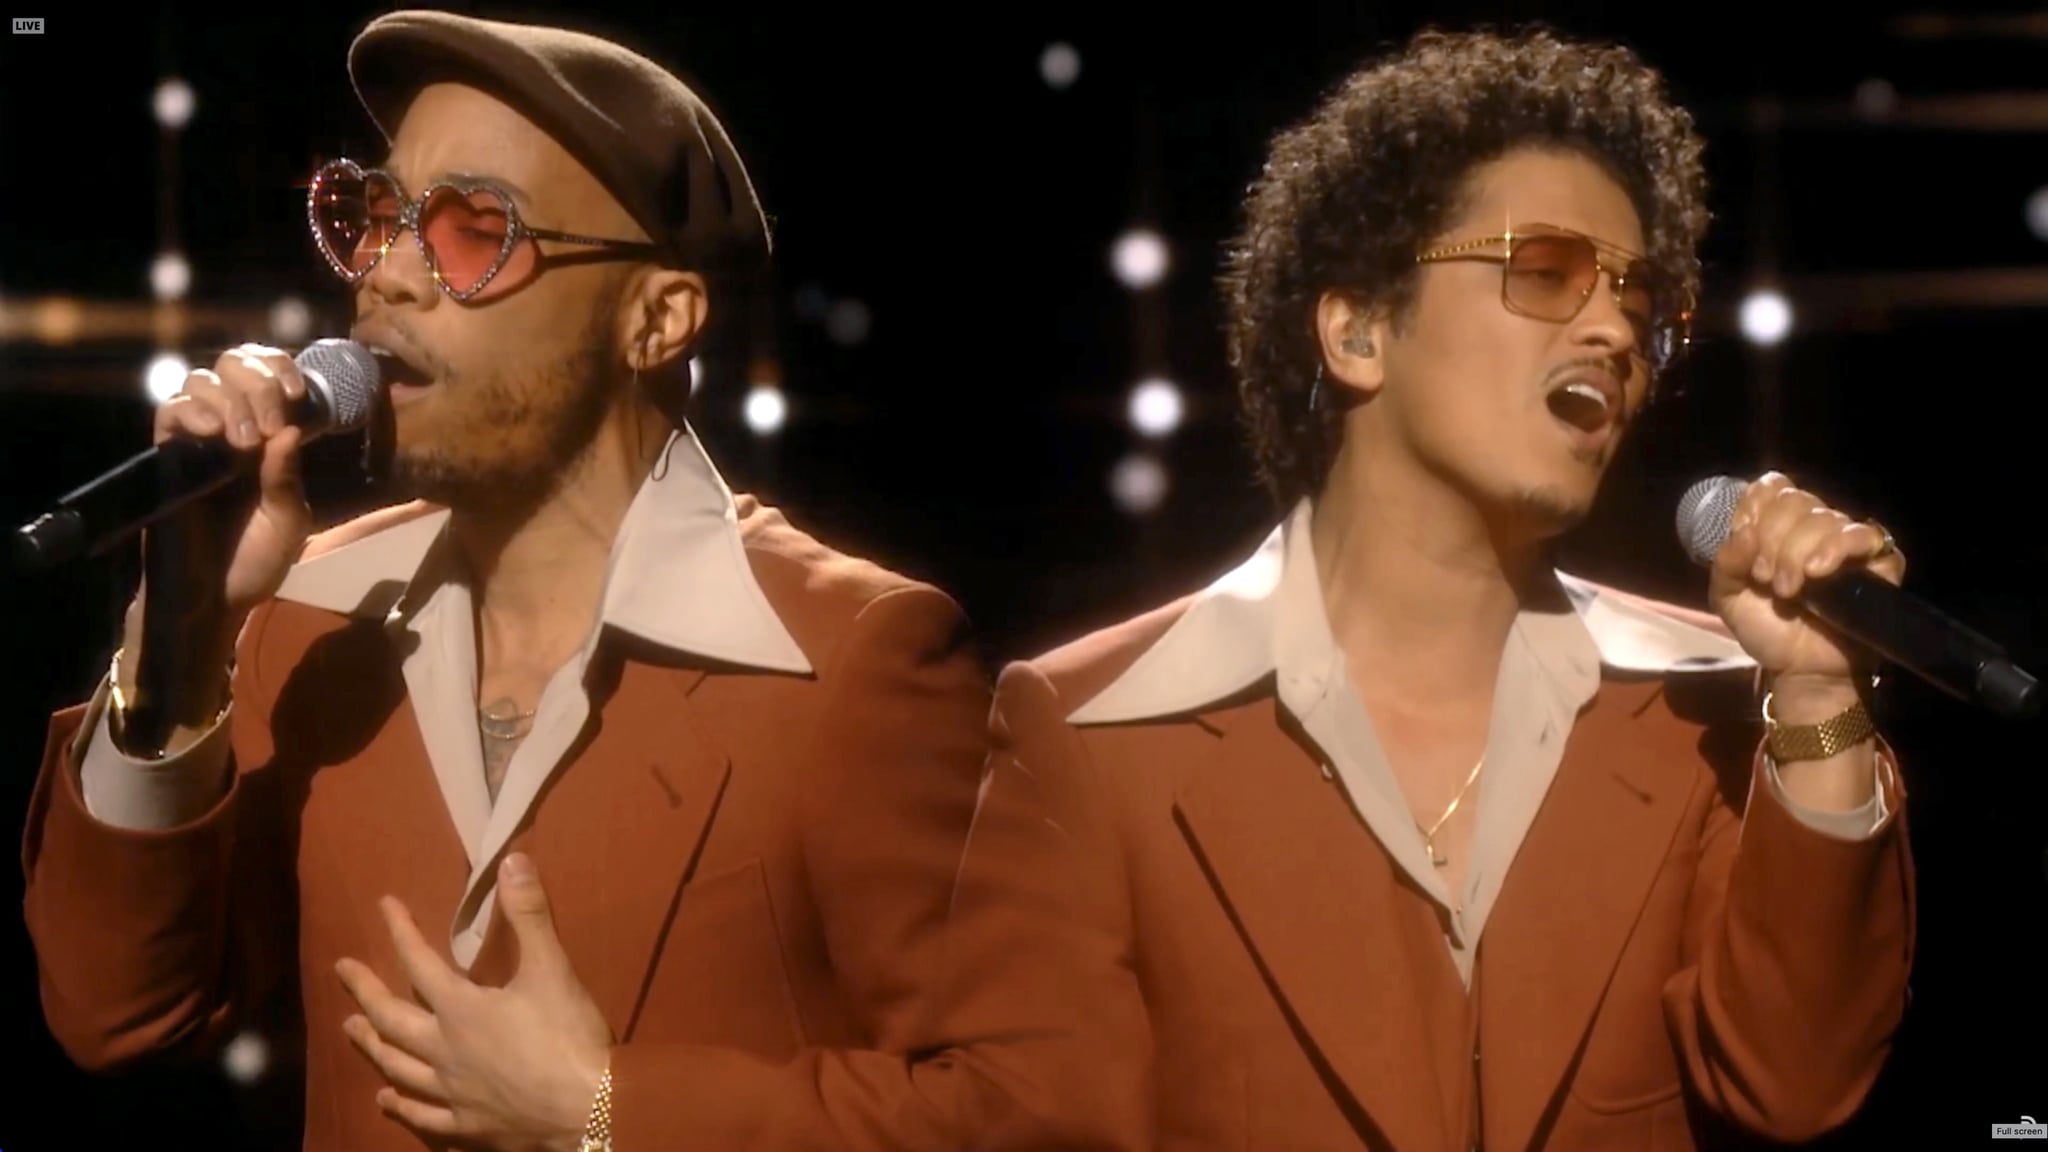 UNSPECIFIED: In this screengrab released on March 14, (L-R) Anderson .Paak and Bruno Mars of music group Silk Sonic perform onstage during the 63rd Annual GRAMMY Awards broadcast on March 14, 2021. (Photo by Theo Wargo/Getty Images for The Recording Academy)